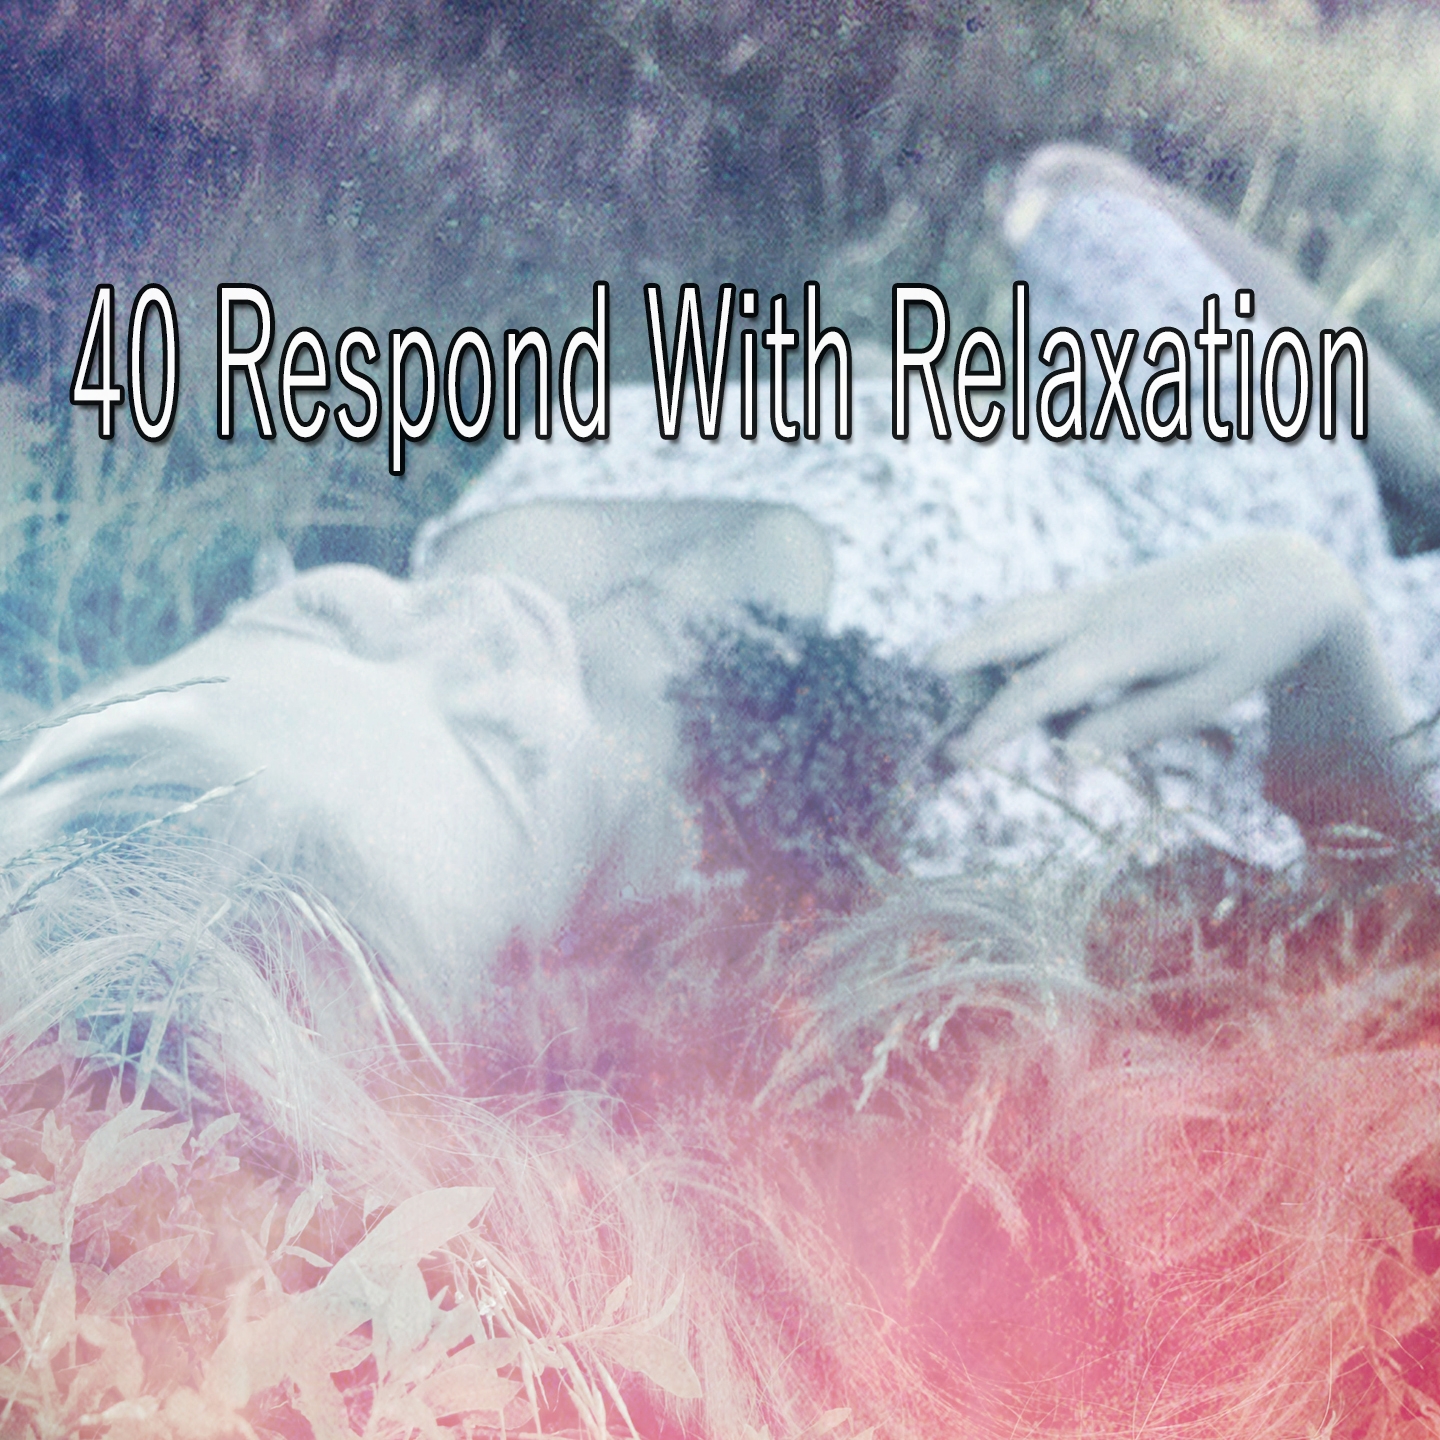 40 Respond With Relaxation